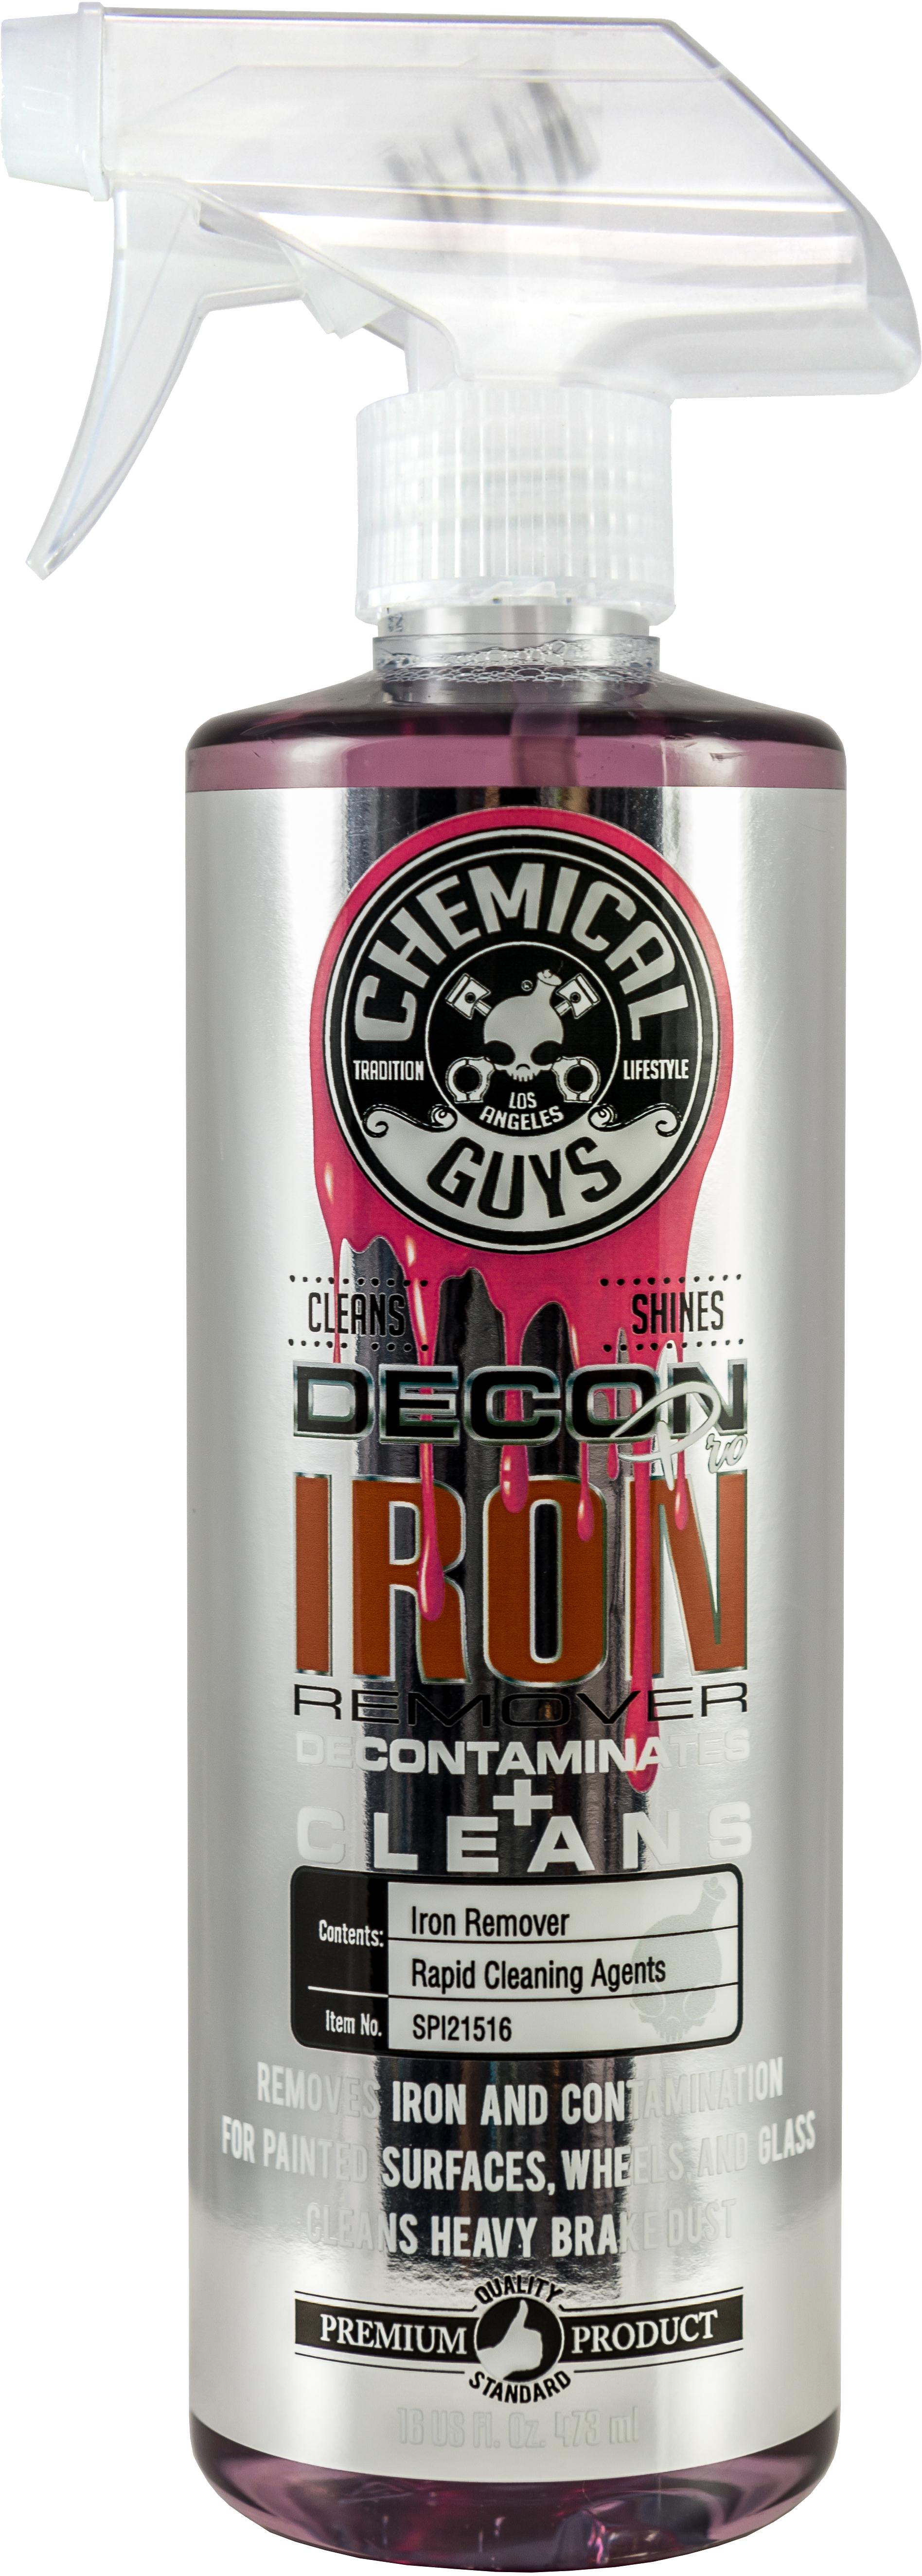 Chemical Guys Decon Pro Iron Remover & Wheel Cleaner